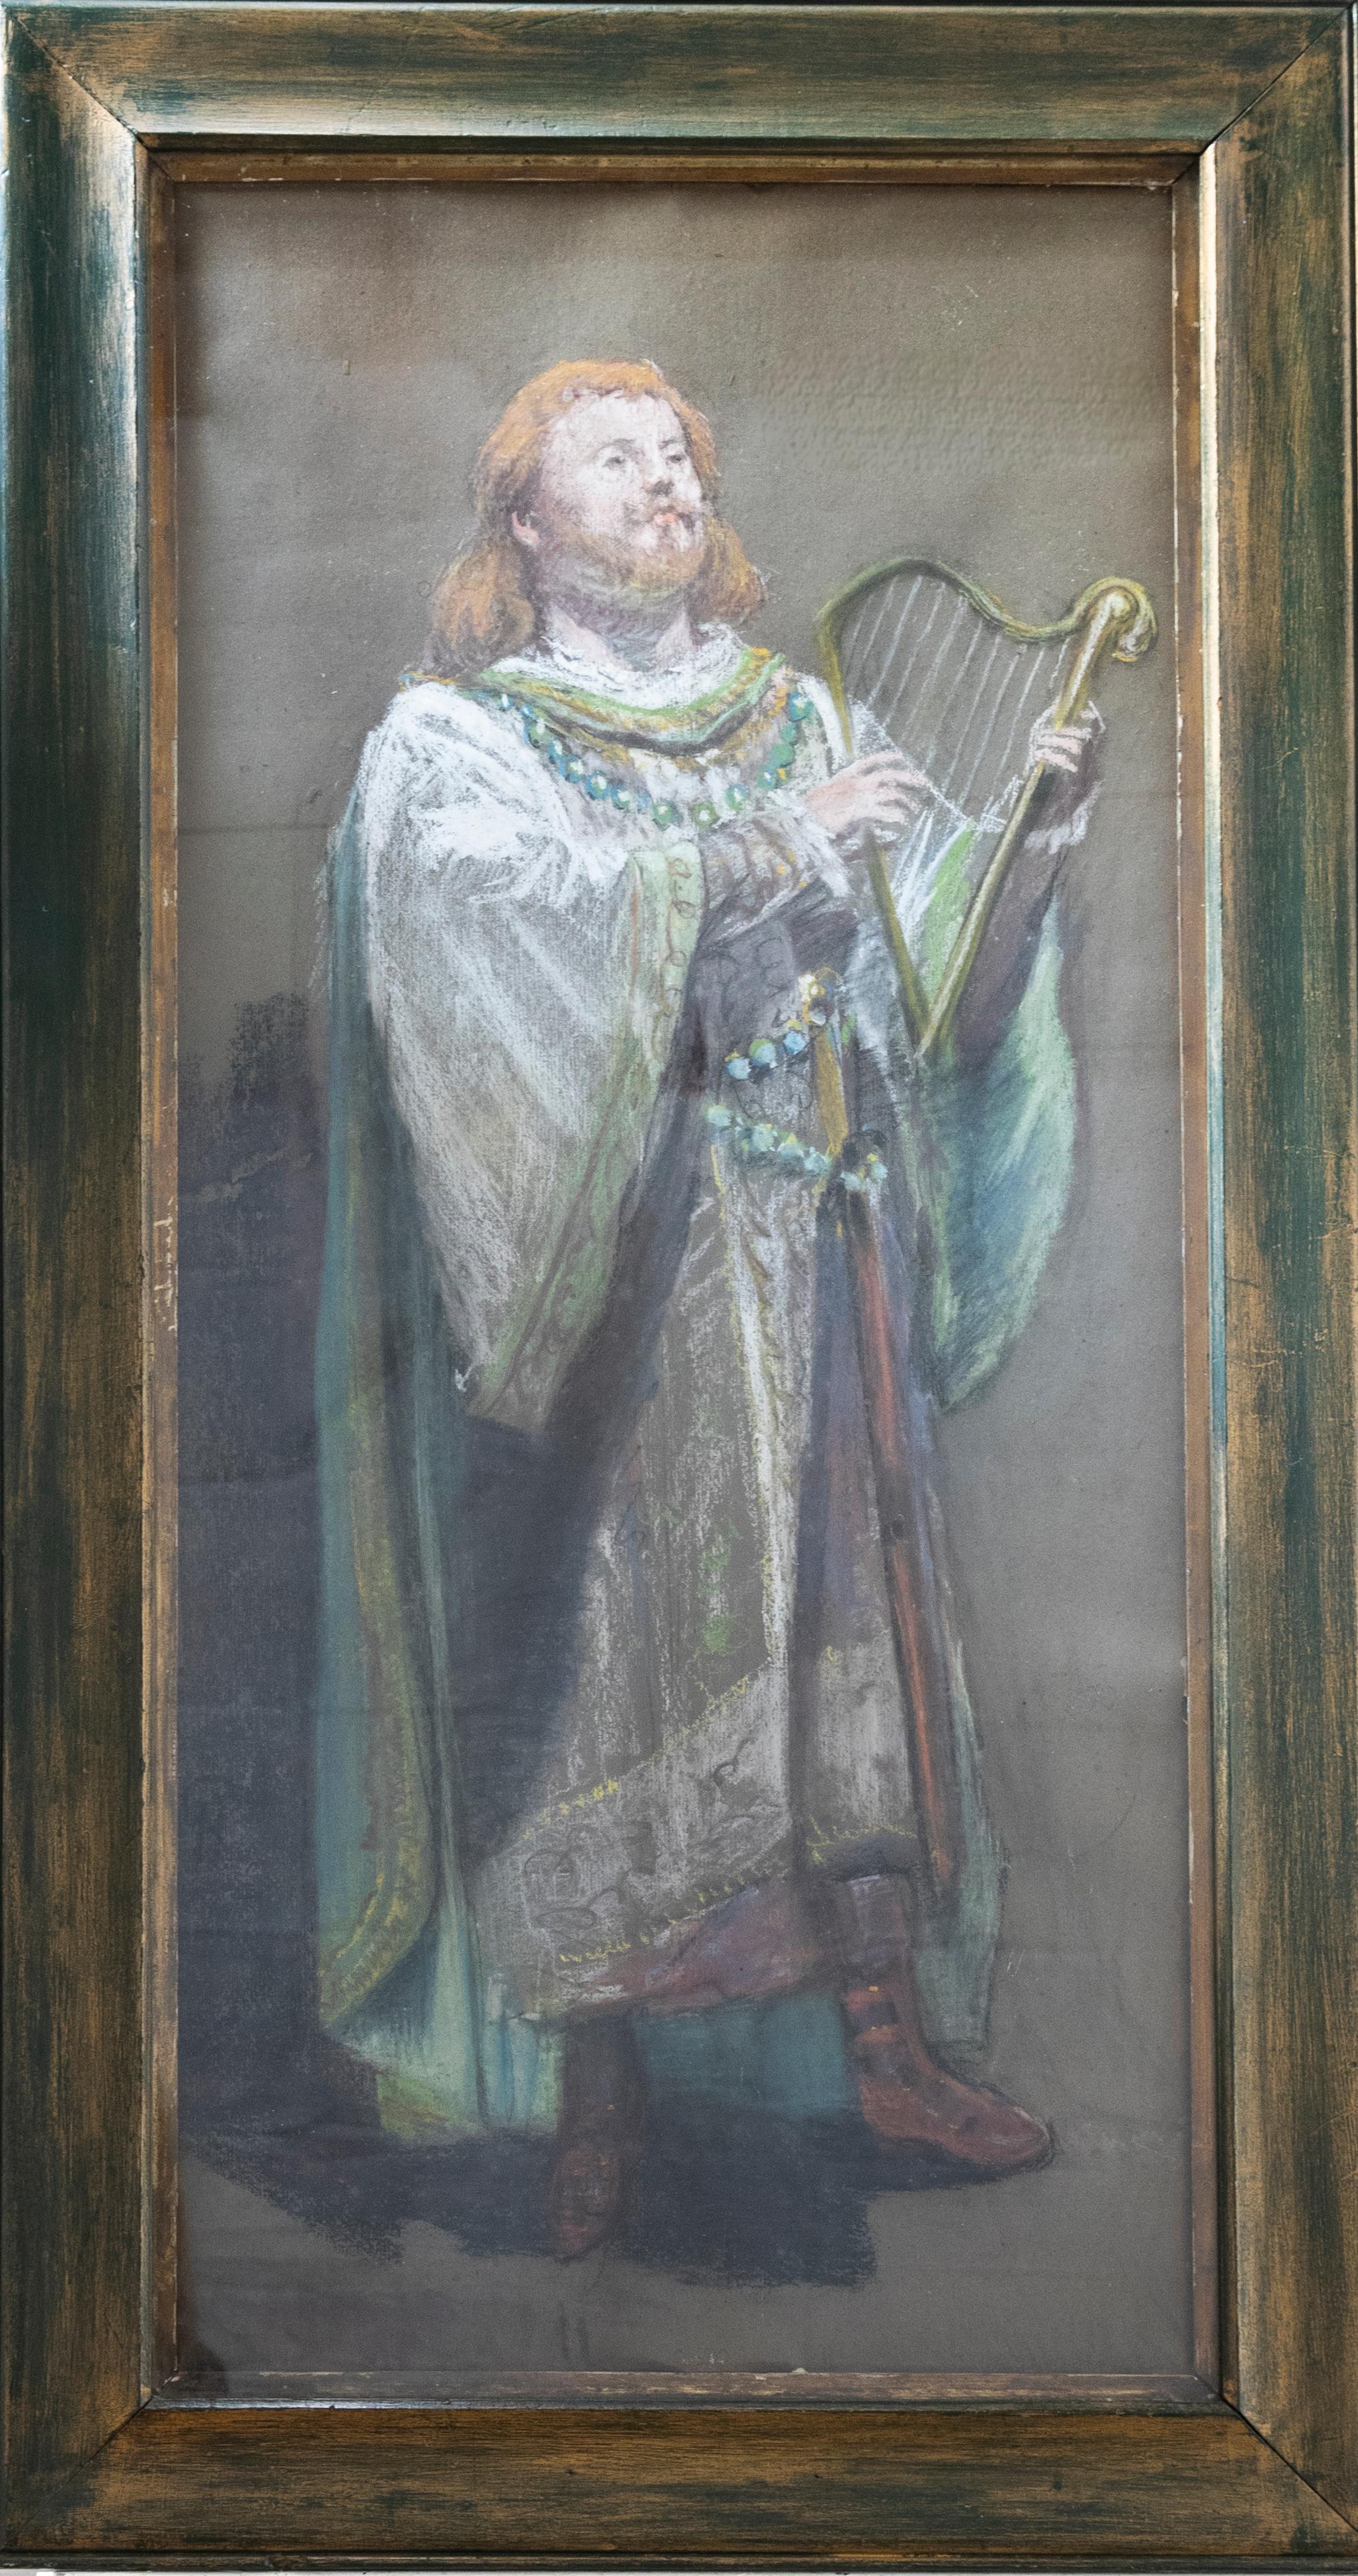 A fine 20th Century costume study. This full length portrait shows an actor (possibly Edouard de Reszke) as Wolfram in Wagner's 1845 opera, Tannhäuser. The drawing is unsigned and presented in a brushed green frame with internal gilt slip. On paper. 